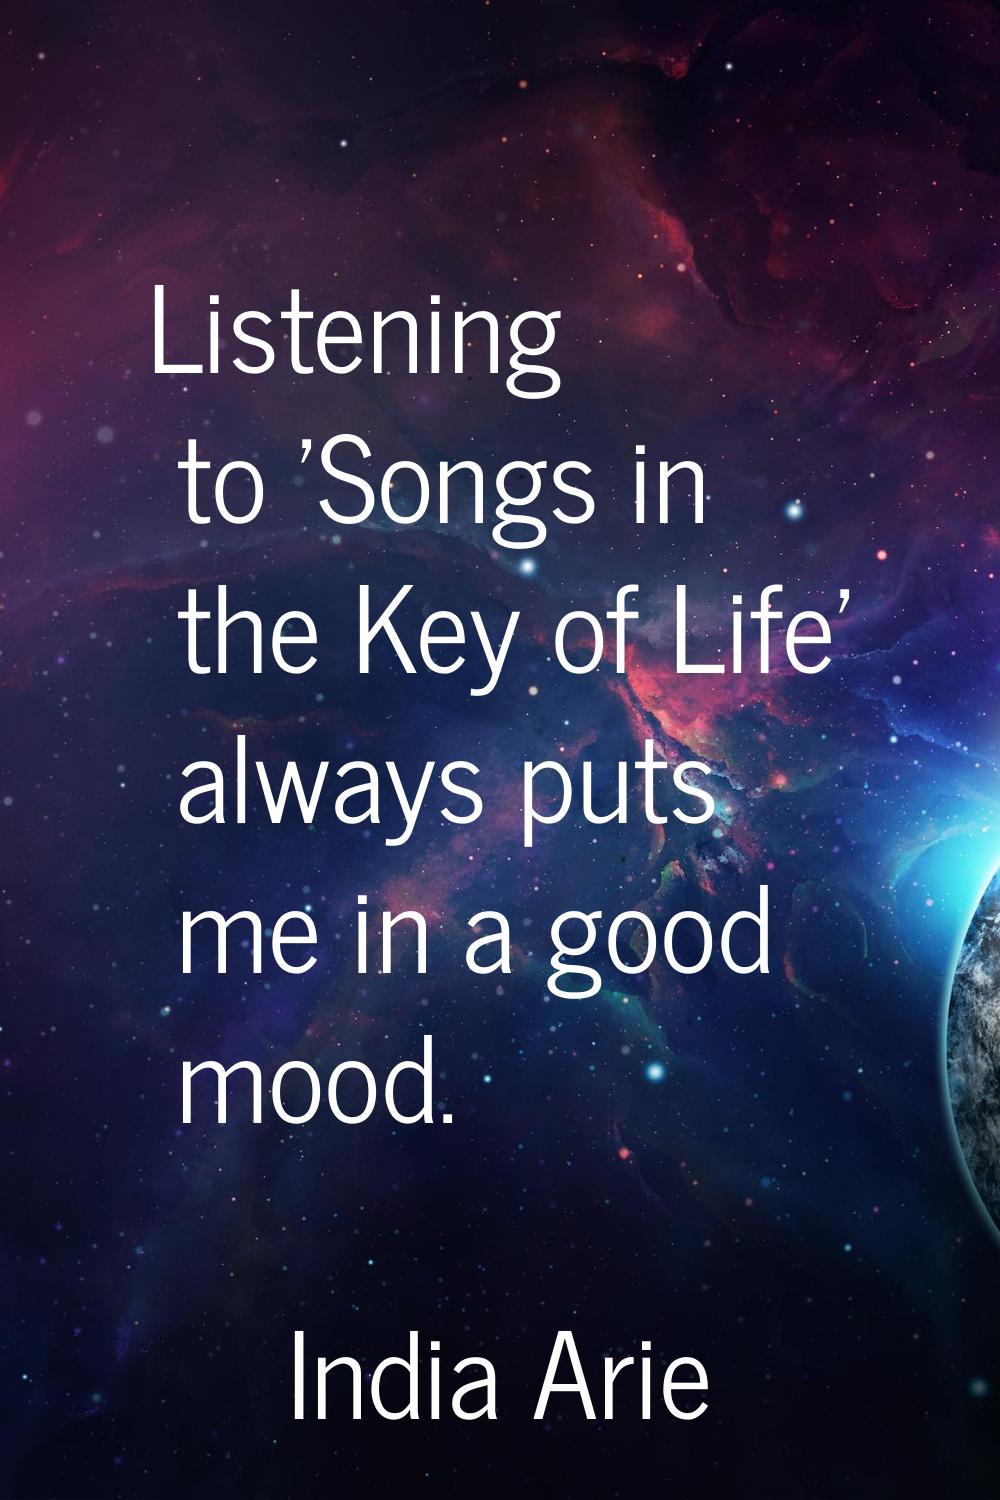 Listening to 'Songs in the Key of Life' always puts me in a good mood.